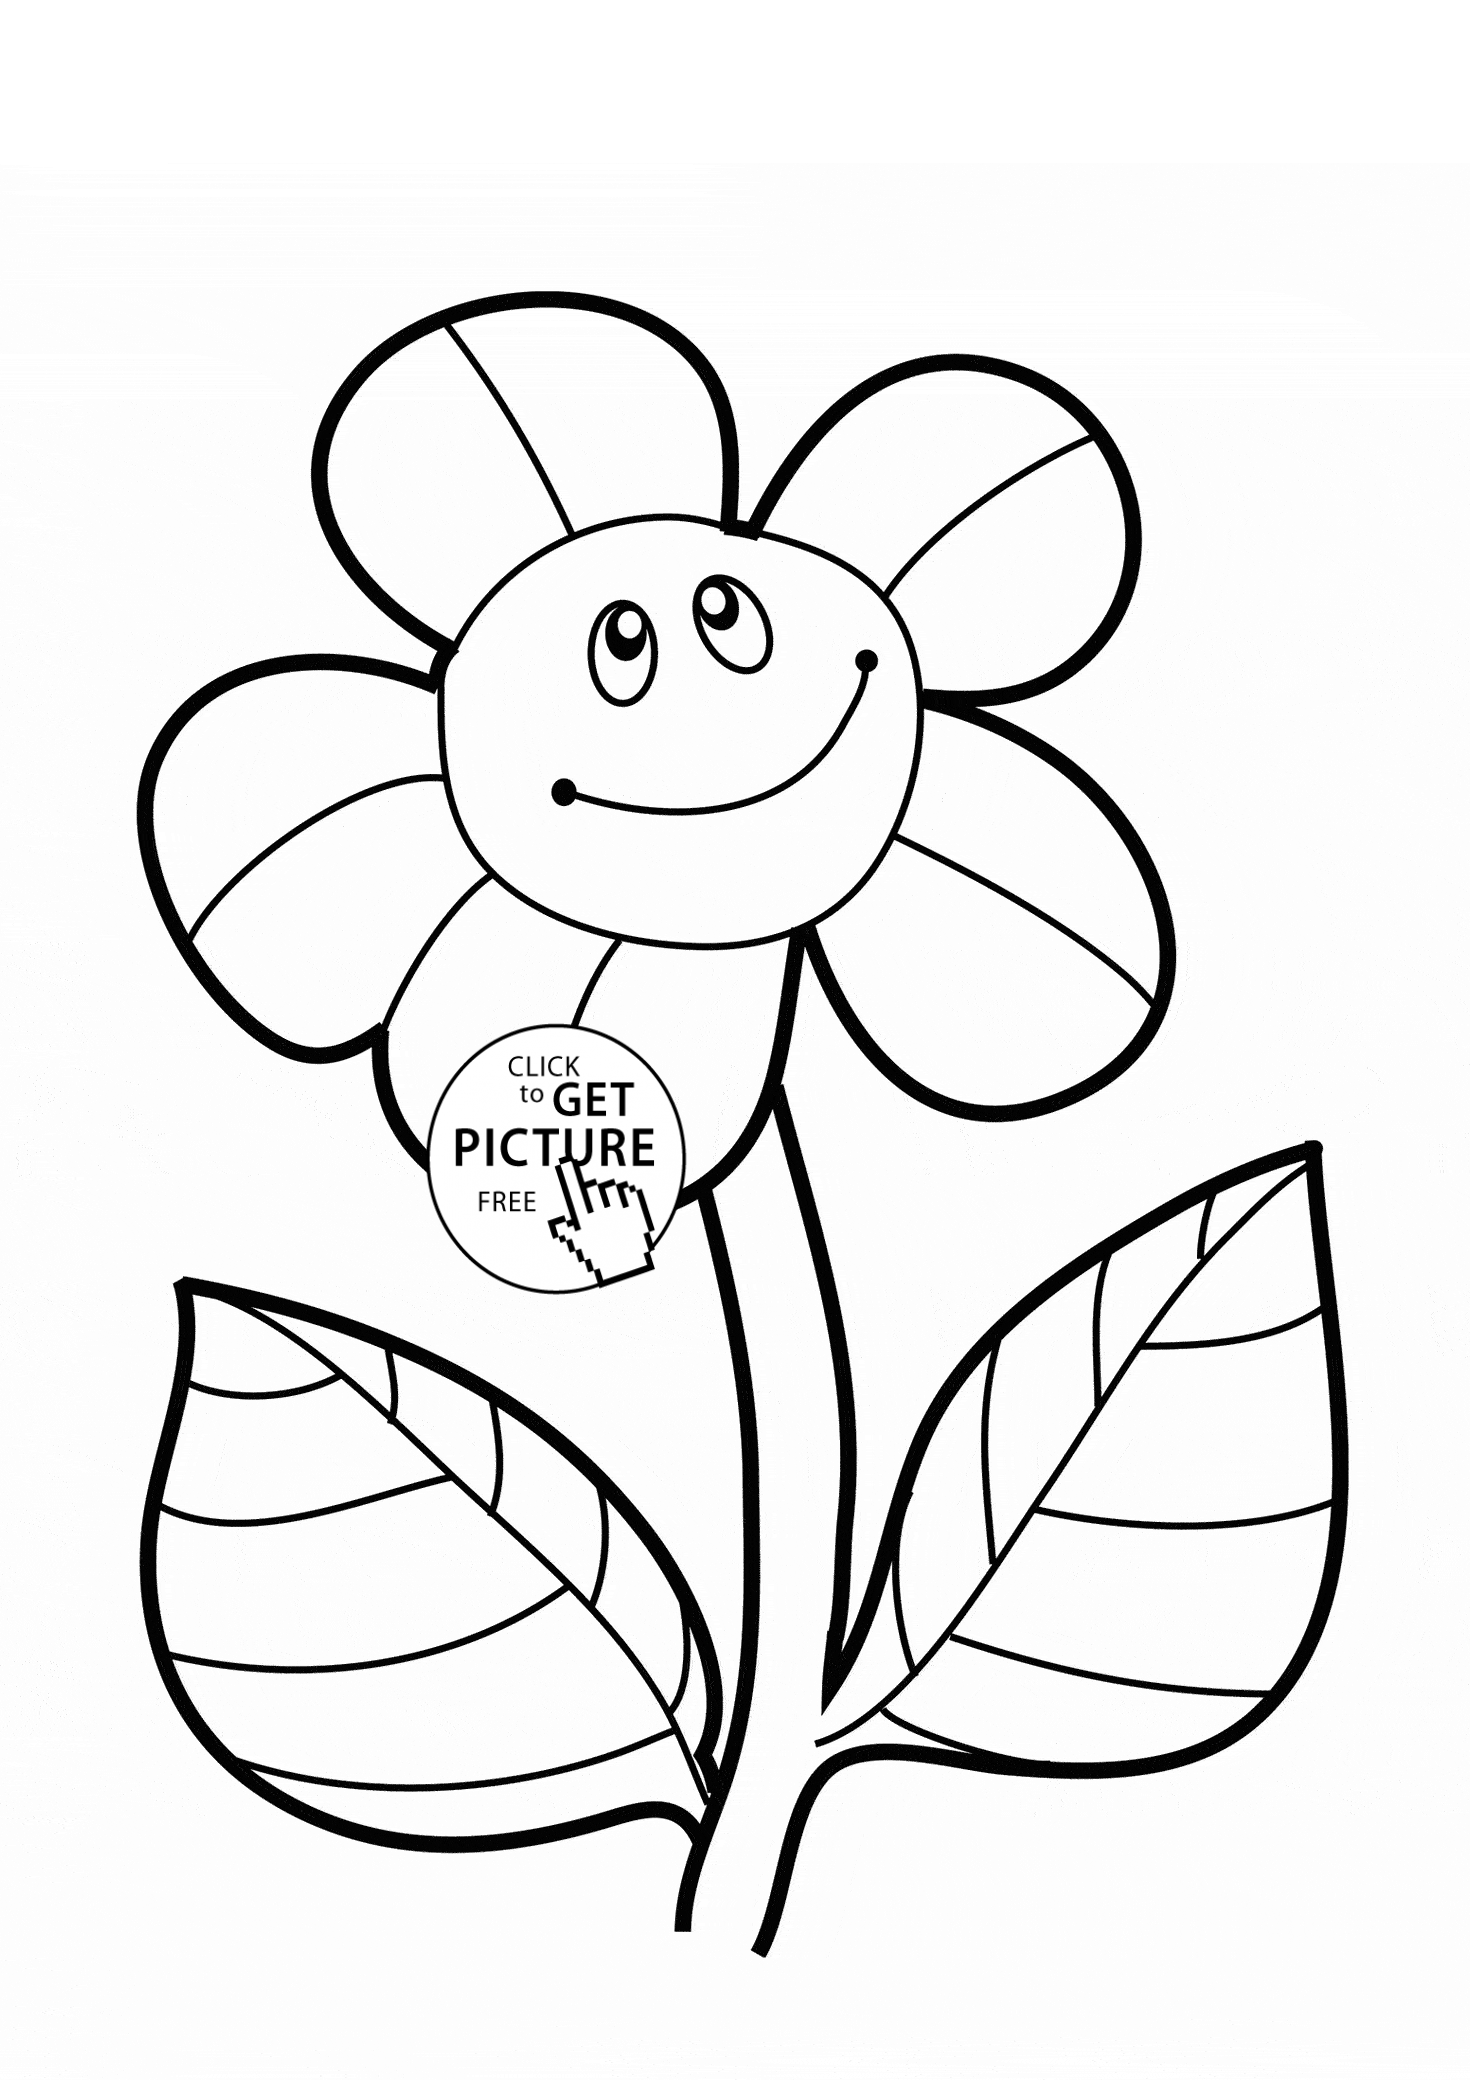 free printable preschool flower coloring pages preschool coloring pages flowers free printable coloring printable flower preschool coloring pages free 